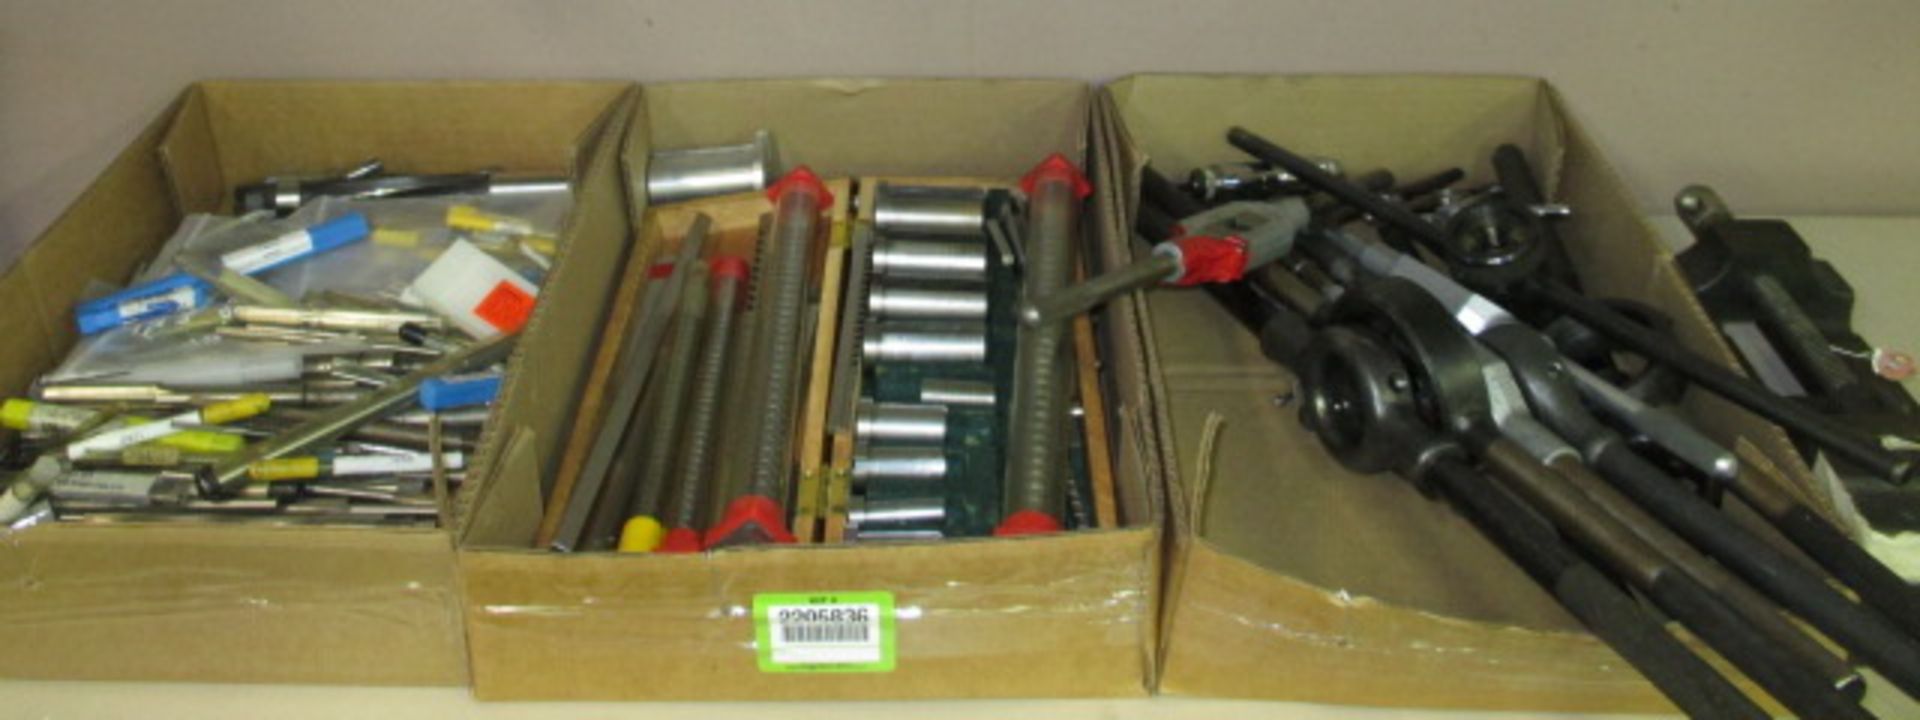 Assorted Tools. Lot: Assorted Tools. Includes: Machine Vise, Reamers, Broaches, Tap and Die Handles.